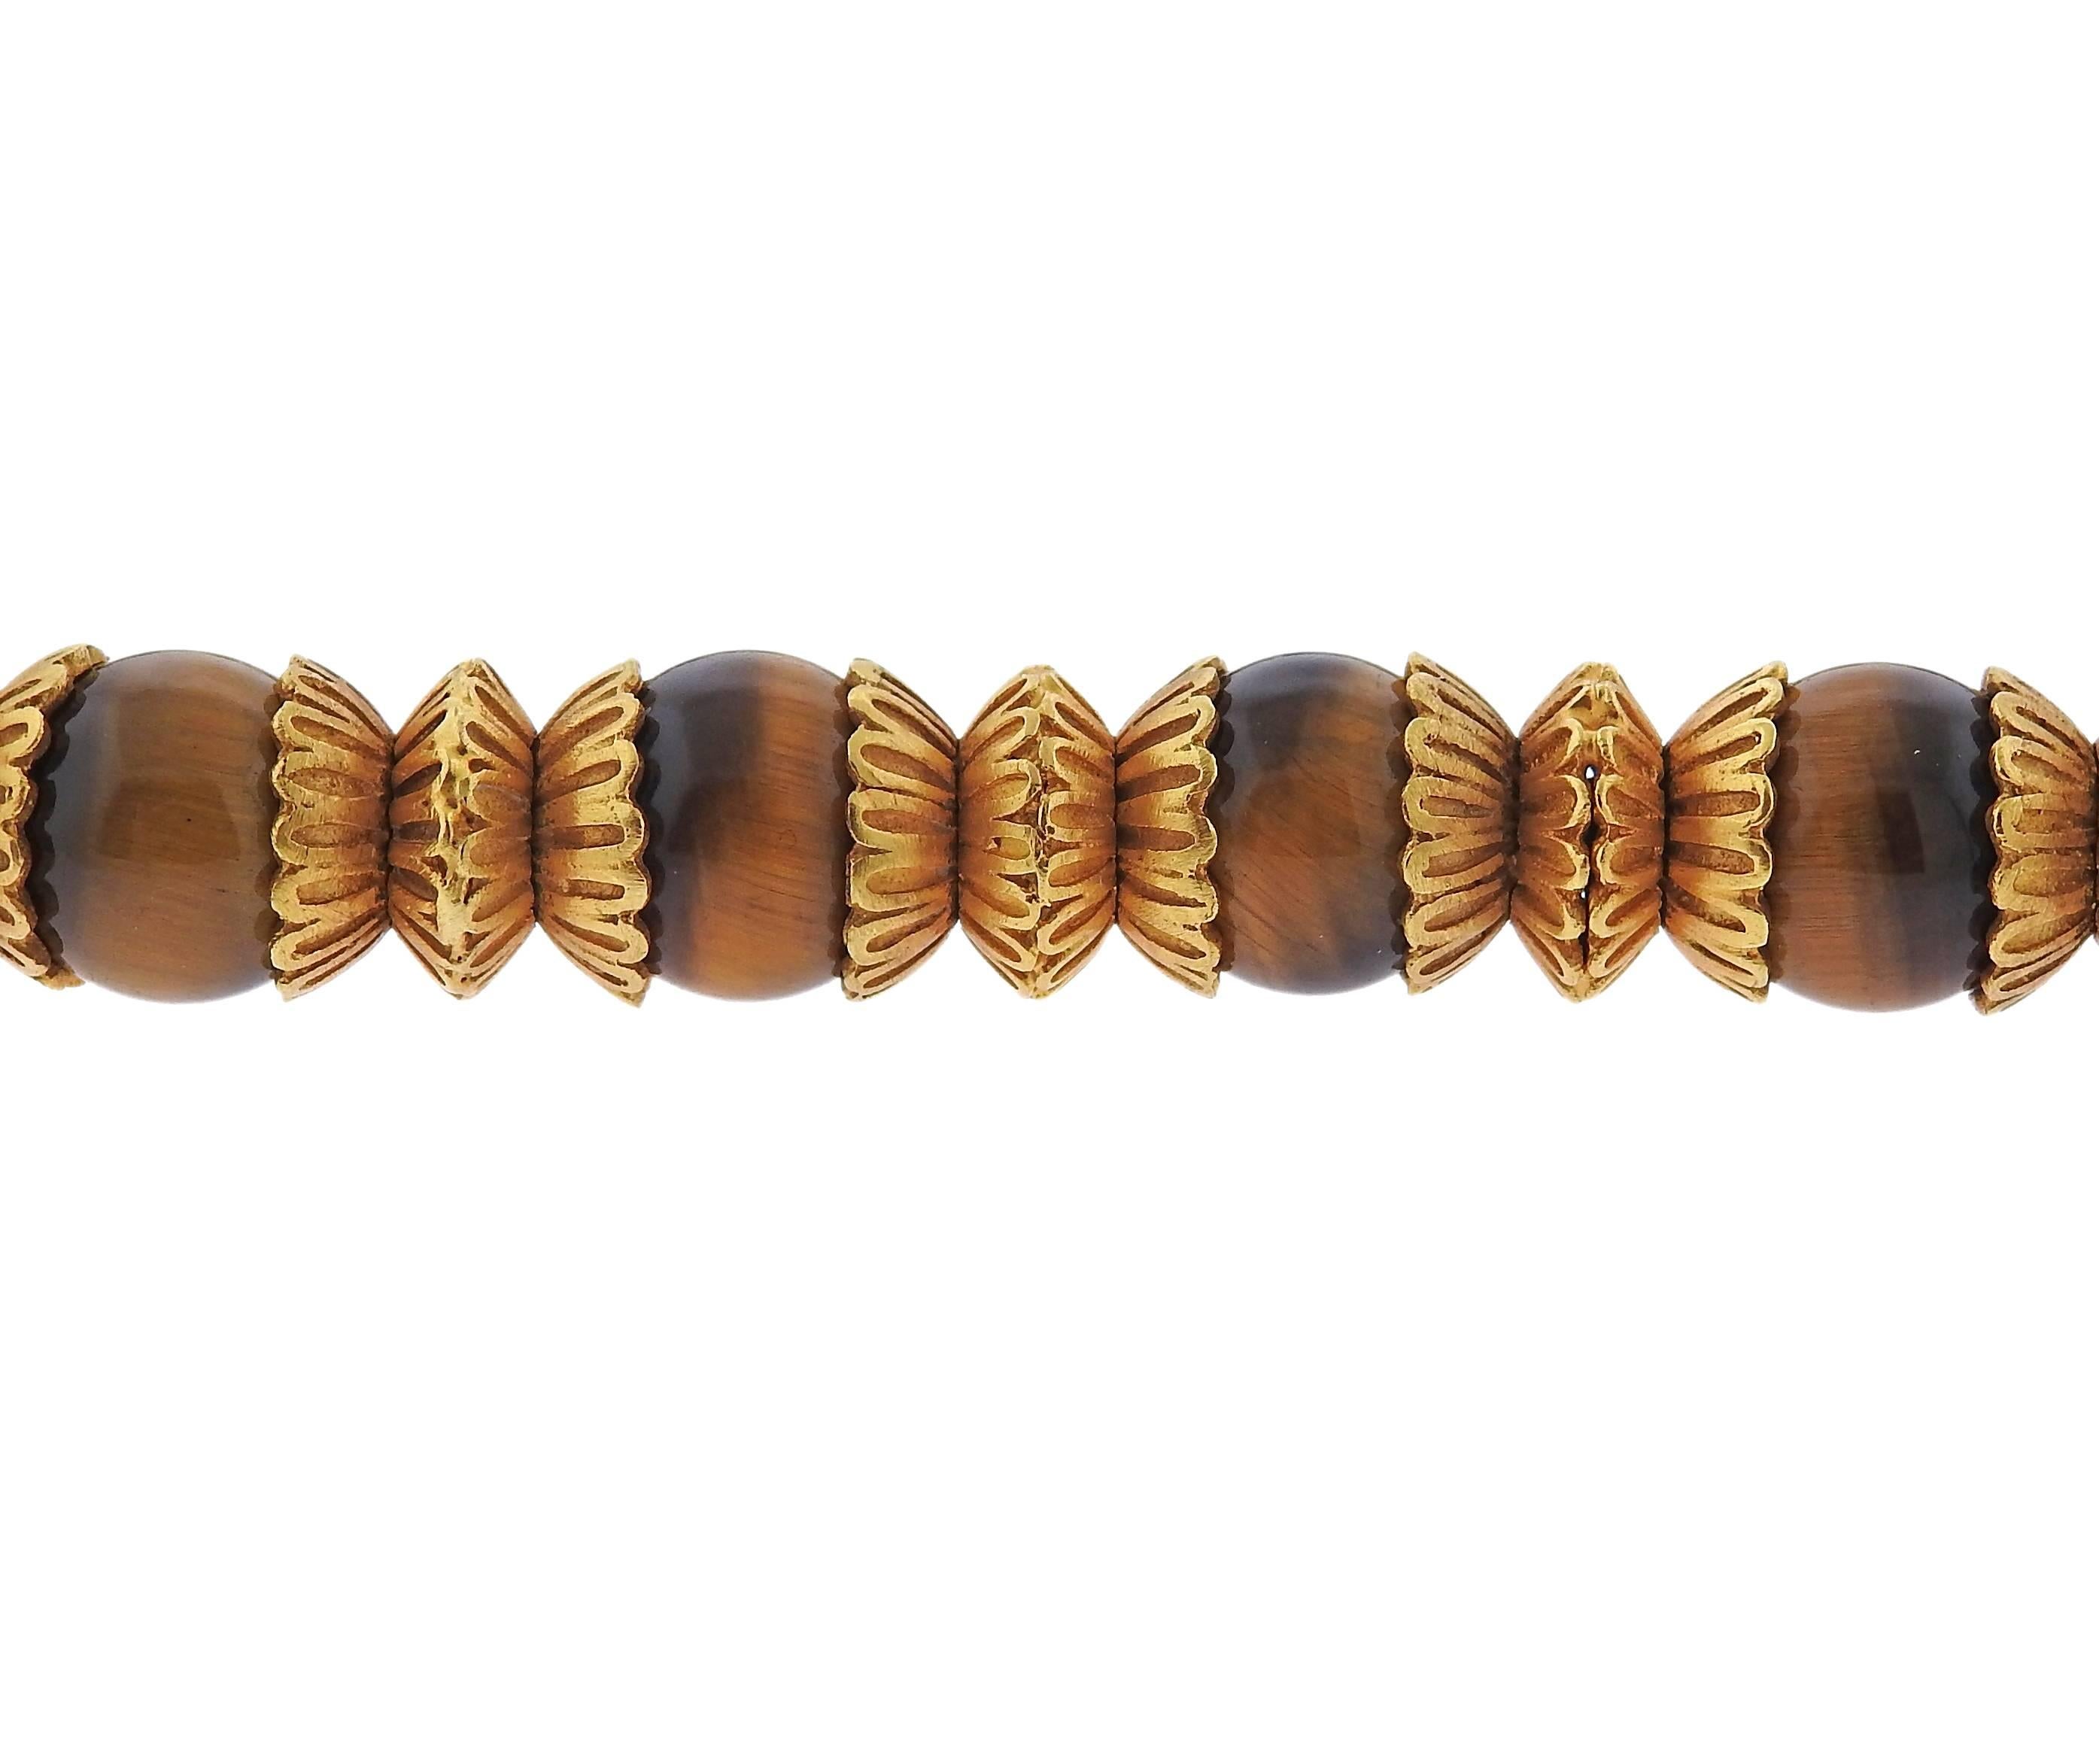 Women's Massive Lalaounis Greece Tiger's Eye Bead Gold Necklace